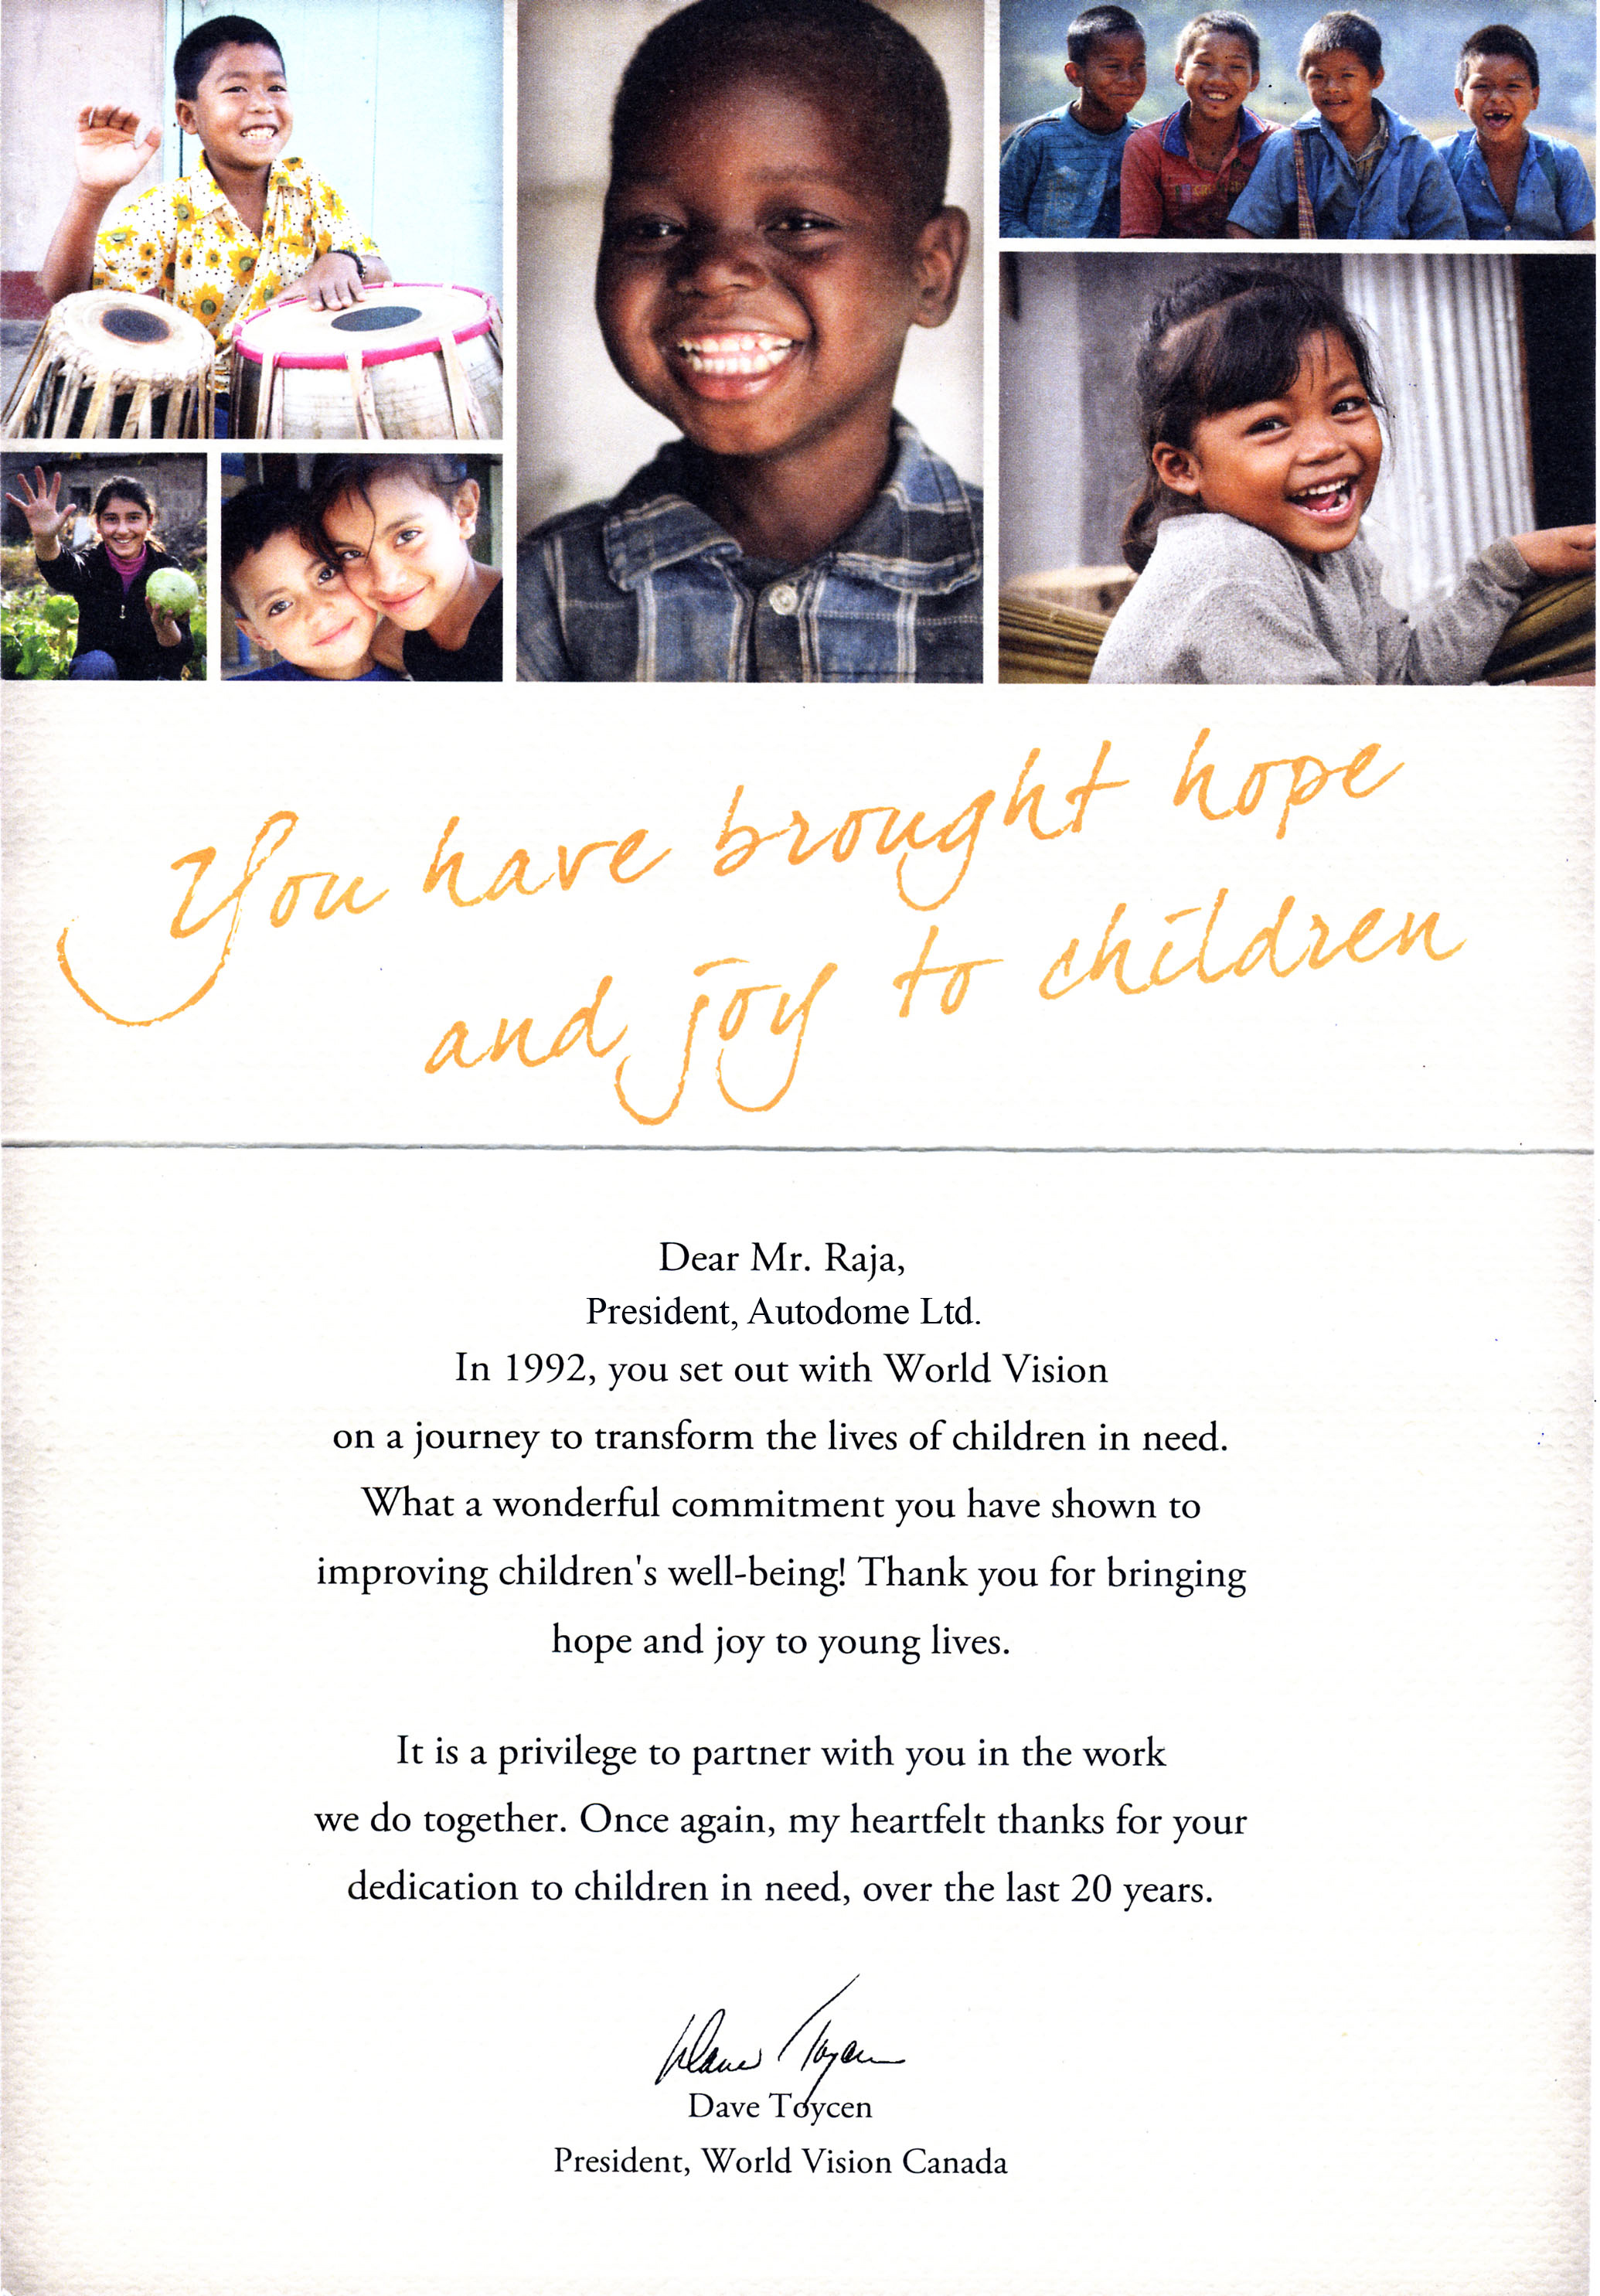 World Vision Canada Thank you letter to Autodome